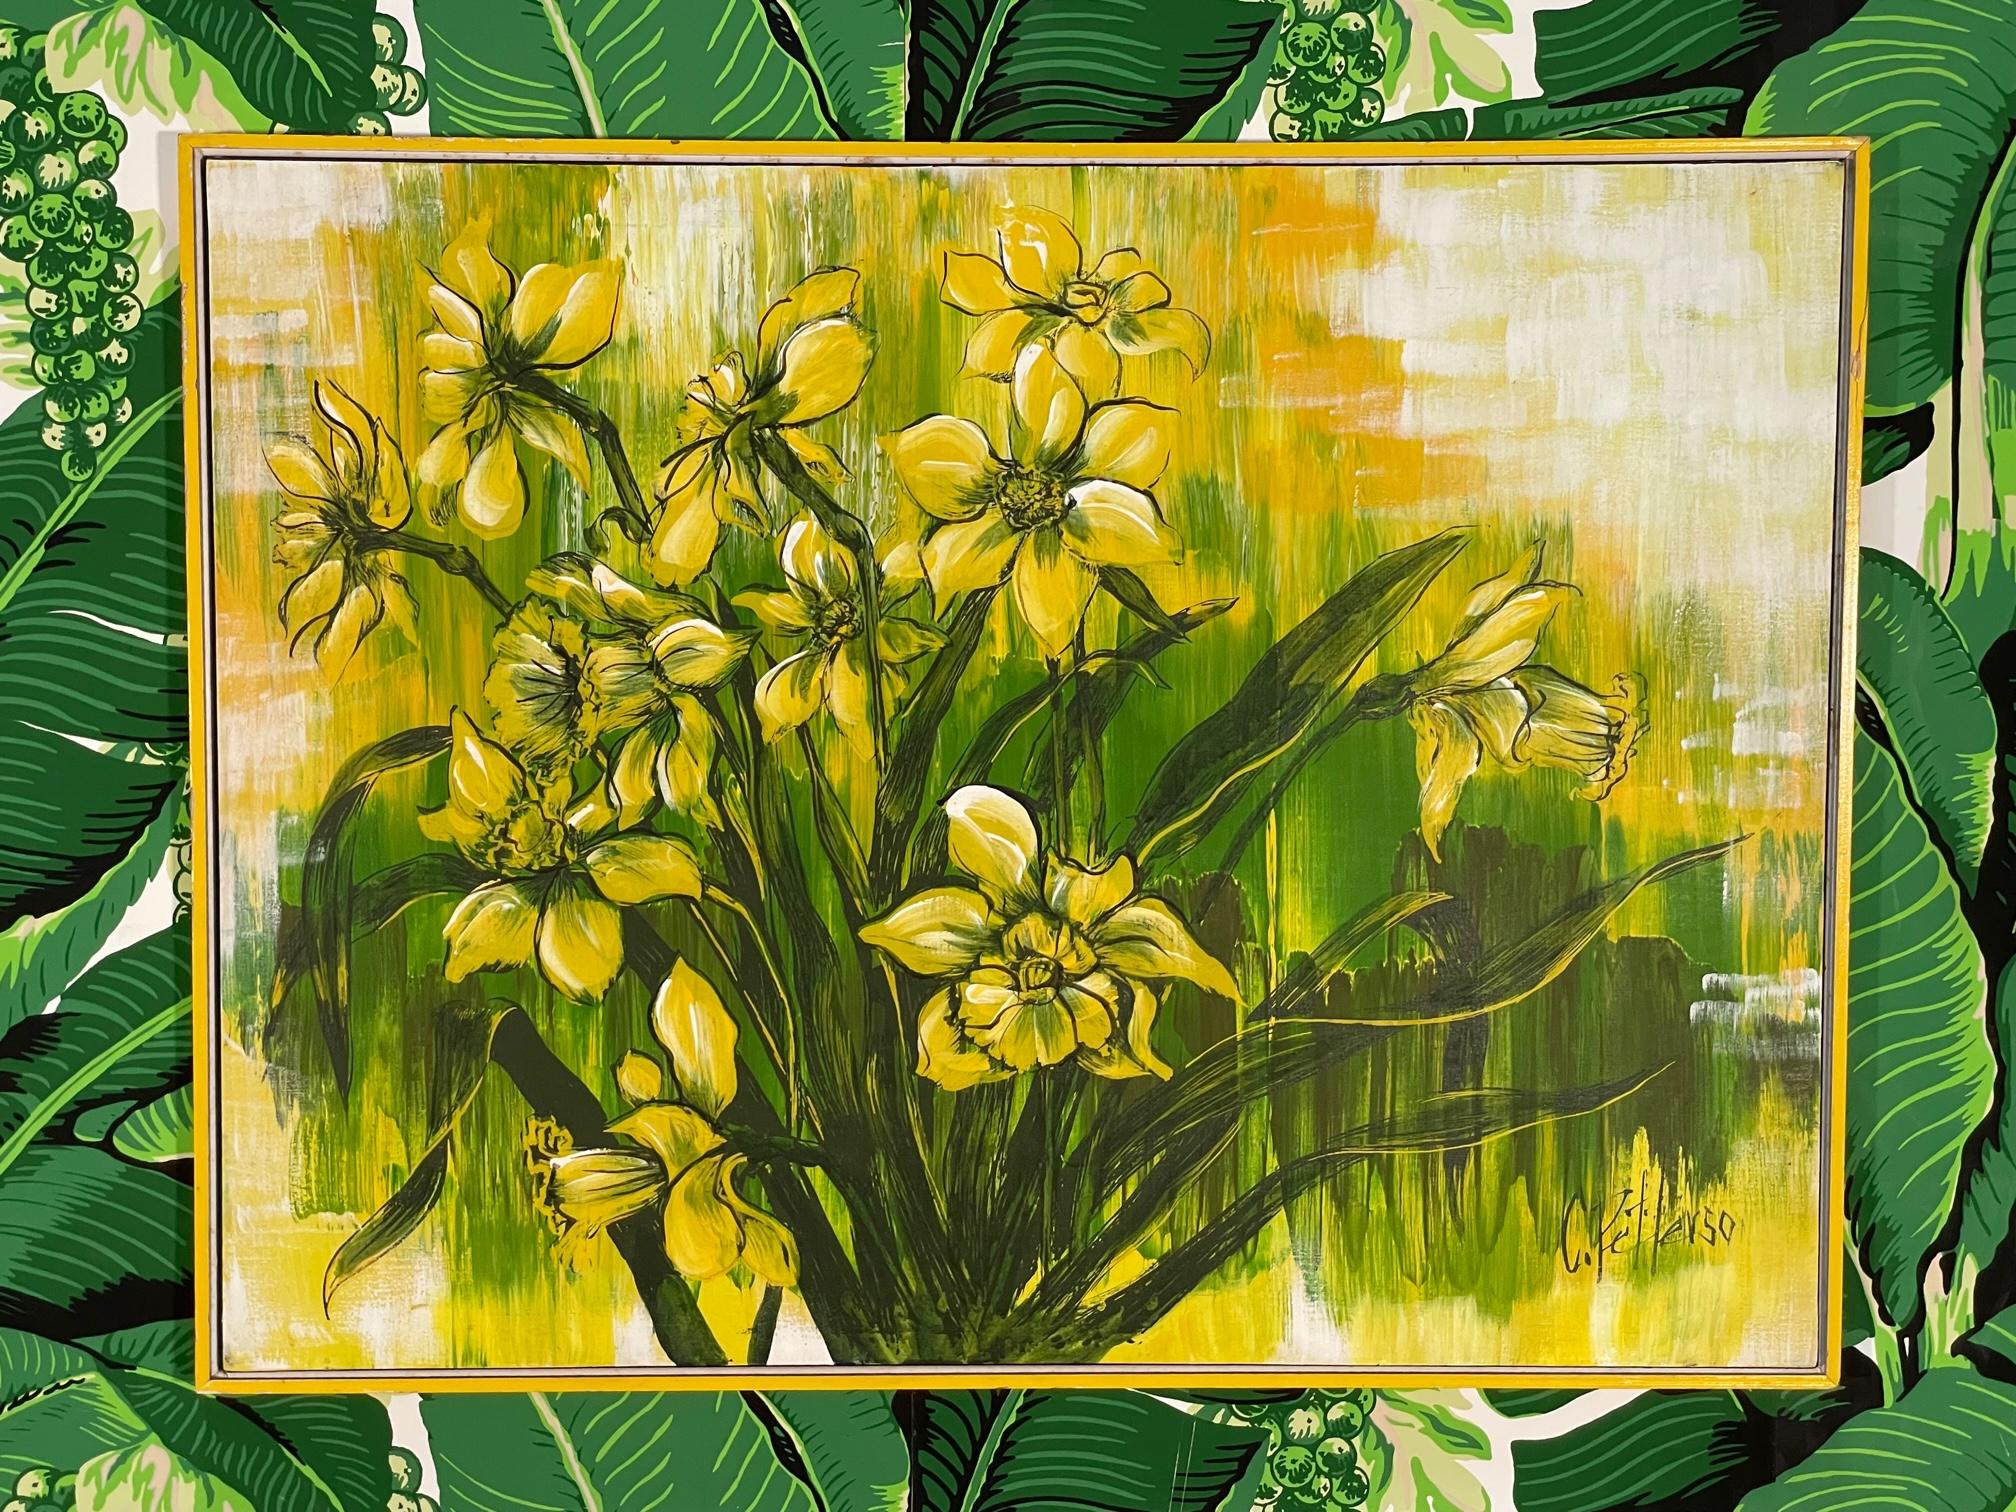 Large 70s still life painting features bold yellows and greens and a yellow wood frame. Good condition with imperfections consistent with age. May exhibit scuffs, marks, or wear, see photos for details.

 